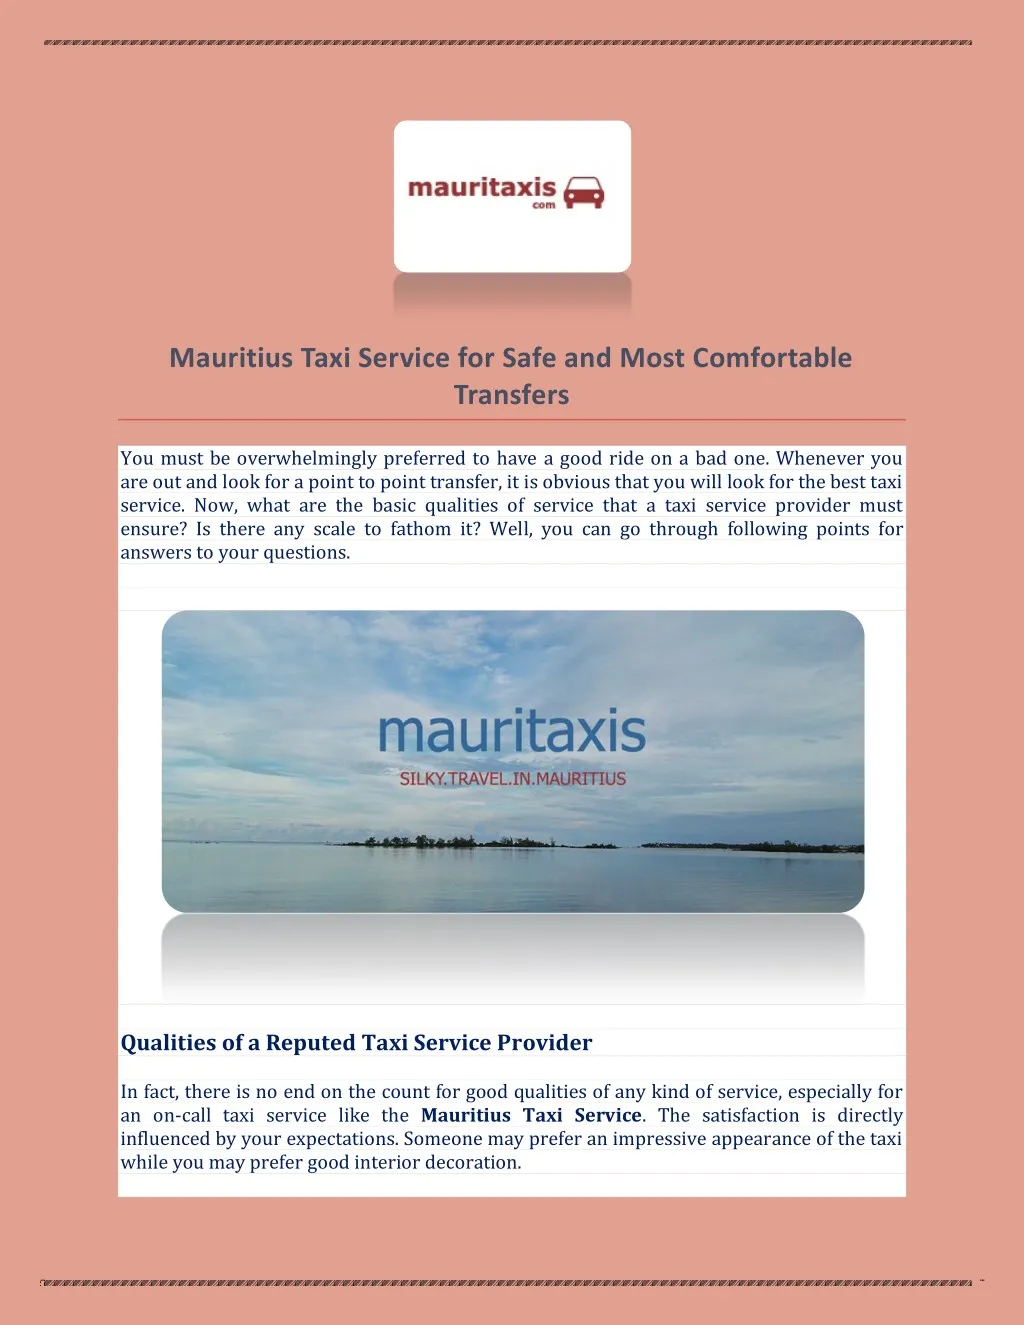 mauritius taxi service for safe and most